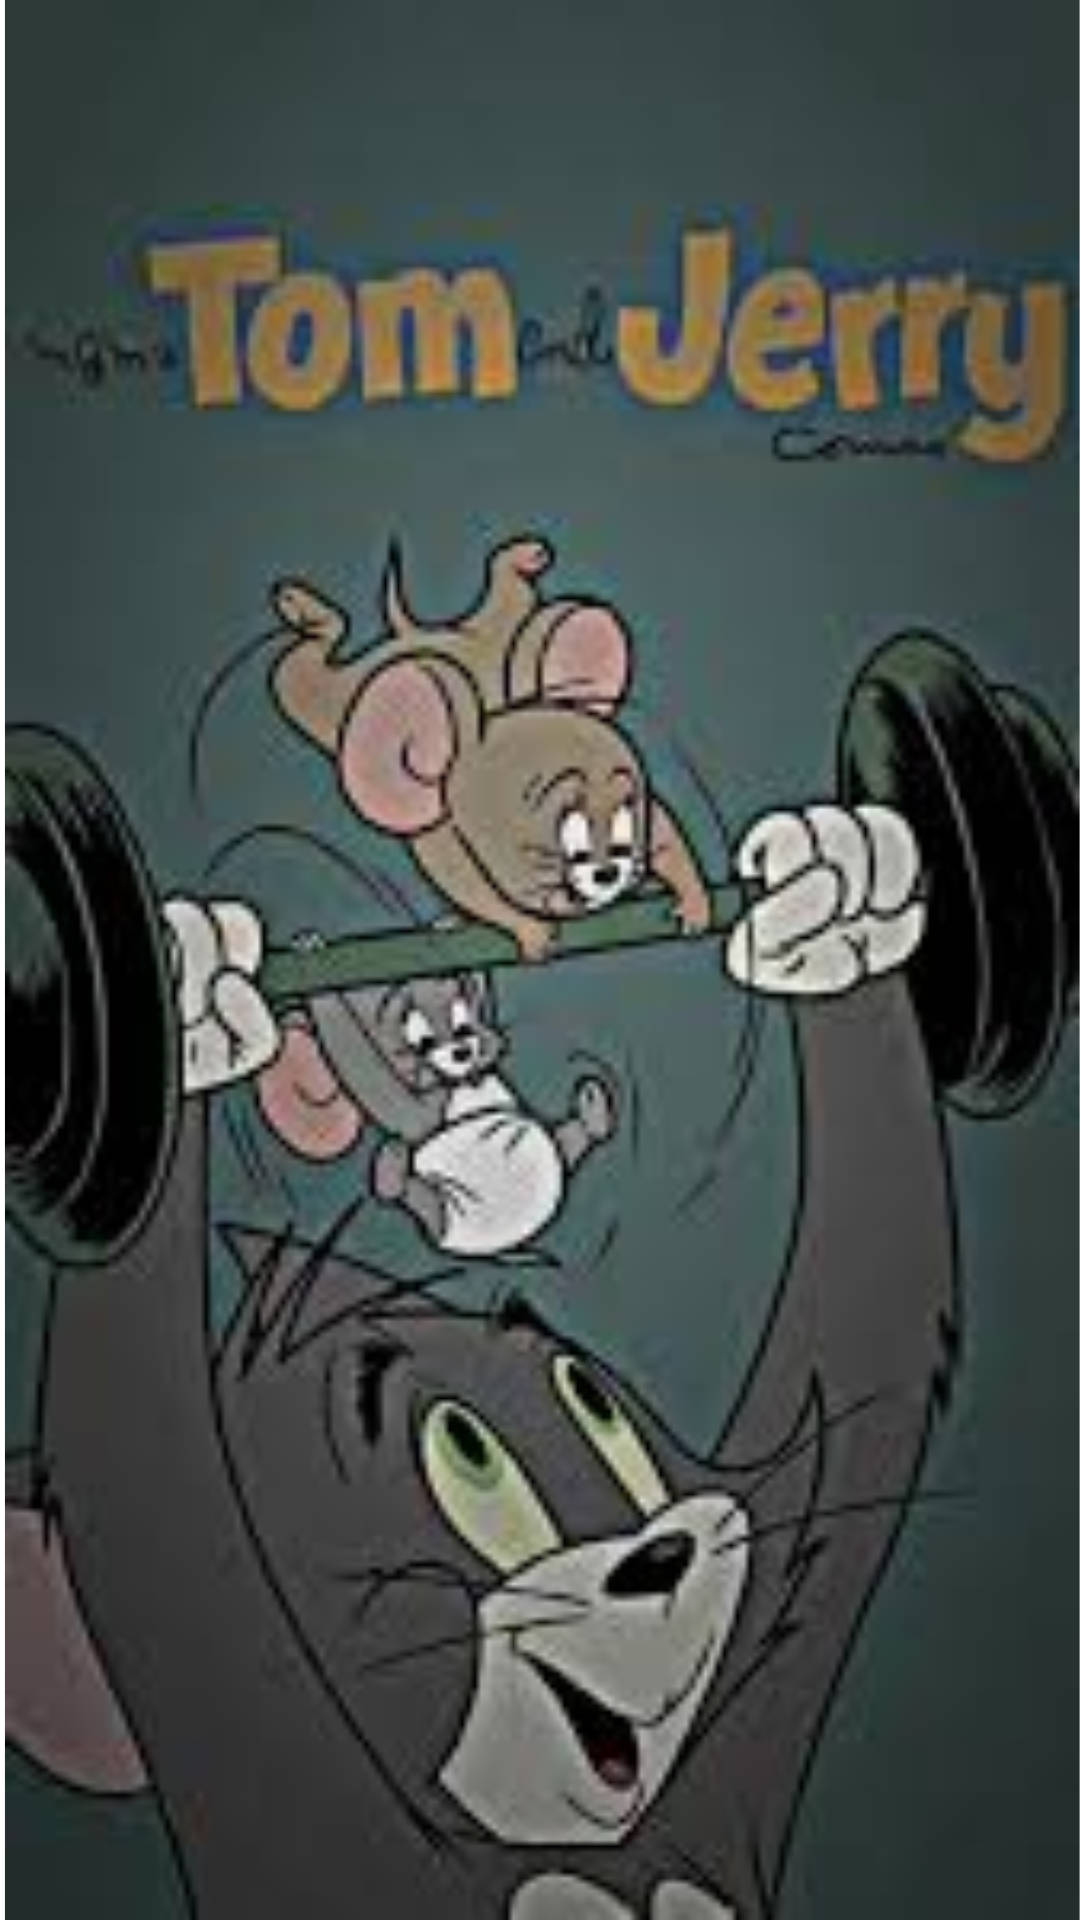 A cartoon image of Tom and Jerry lifting weights - Tom and Jerry